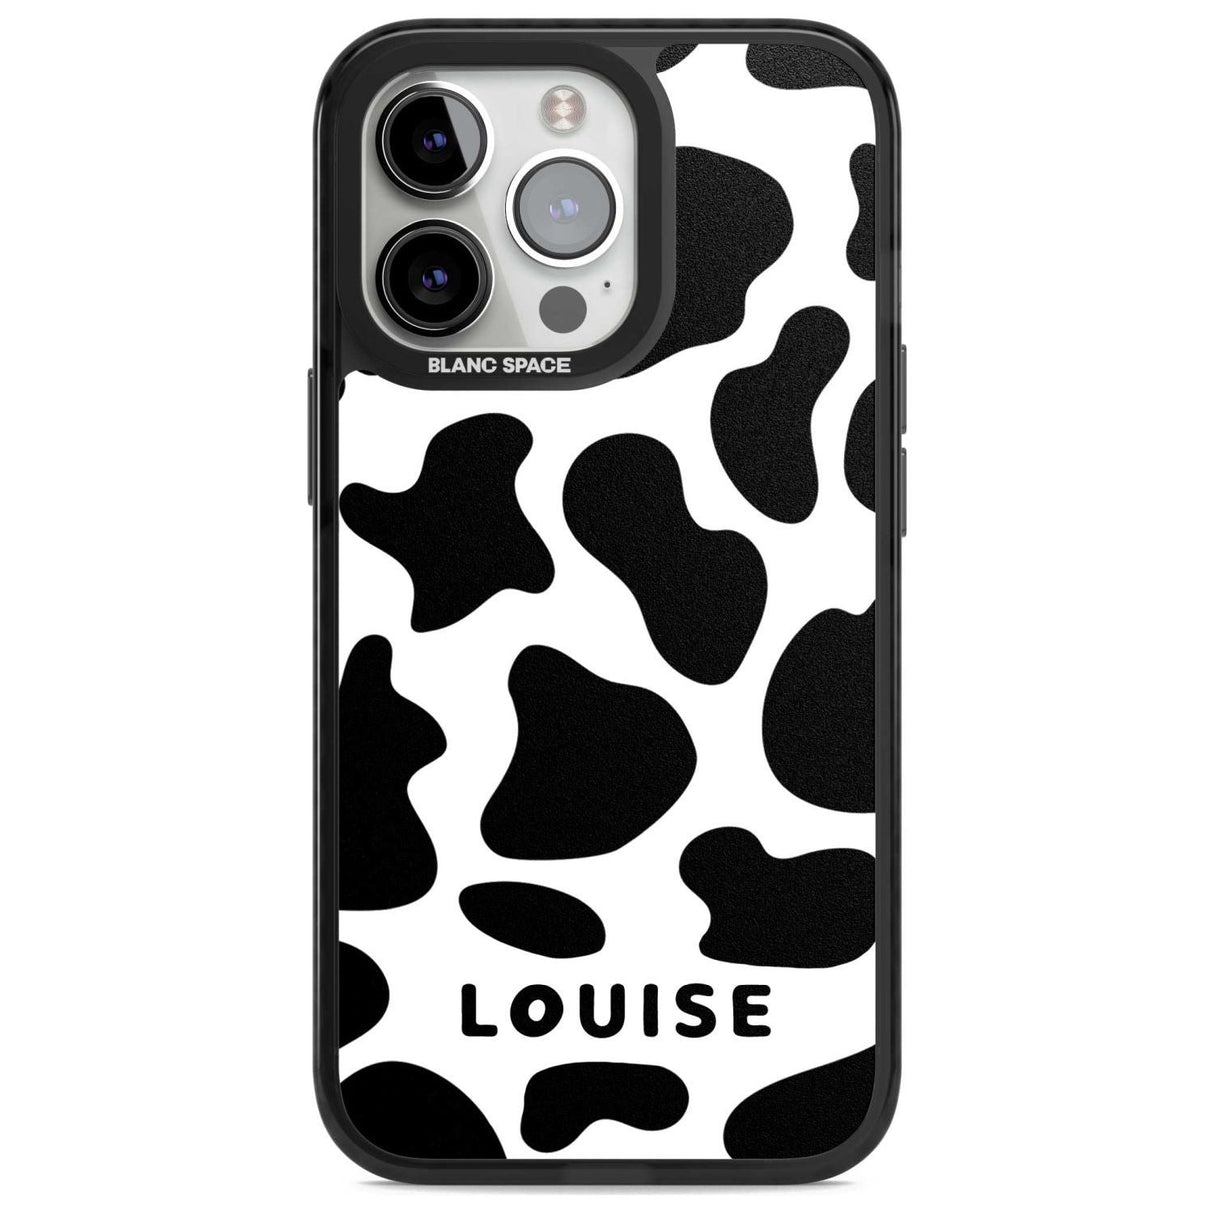 Personalised Cow Print Custom Phone Case iPhone 15 Pro Max / Magsafe Black Impact Case,iPhone 15 Pro / Magsafe Black Impact Case,iPhone 14 Pro Max / Magsafe Black Impact Case,iPhone 14 Pro / Magsafe Black Impact Case,iPhone 13 Pro / Magsafe Black Impact Case Blanc Space